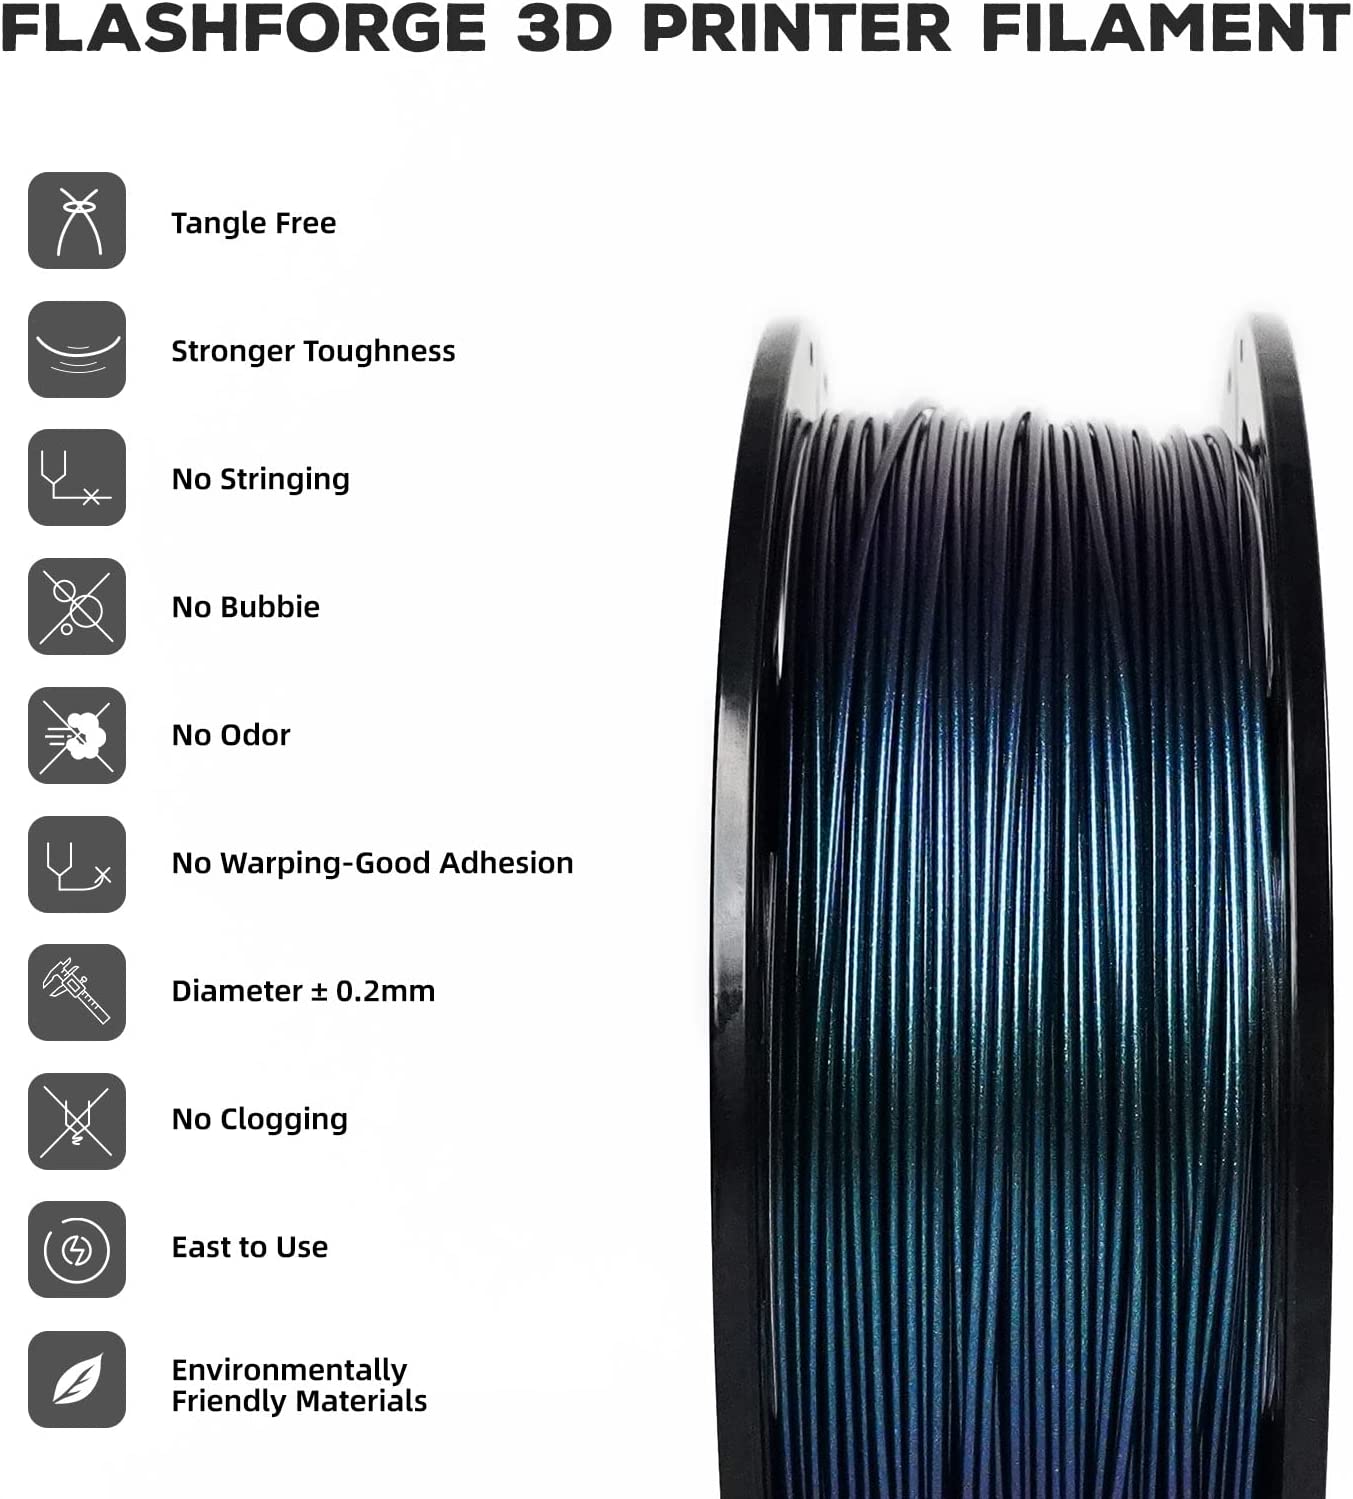 Creality Hyper Series PLA 3D Printing Filament 1kg 1.75mm For 3D Printer  Compatible With K1 Pro Fast Print 600mm/s - Smith3D Malaysia